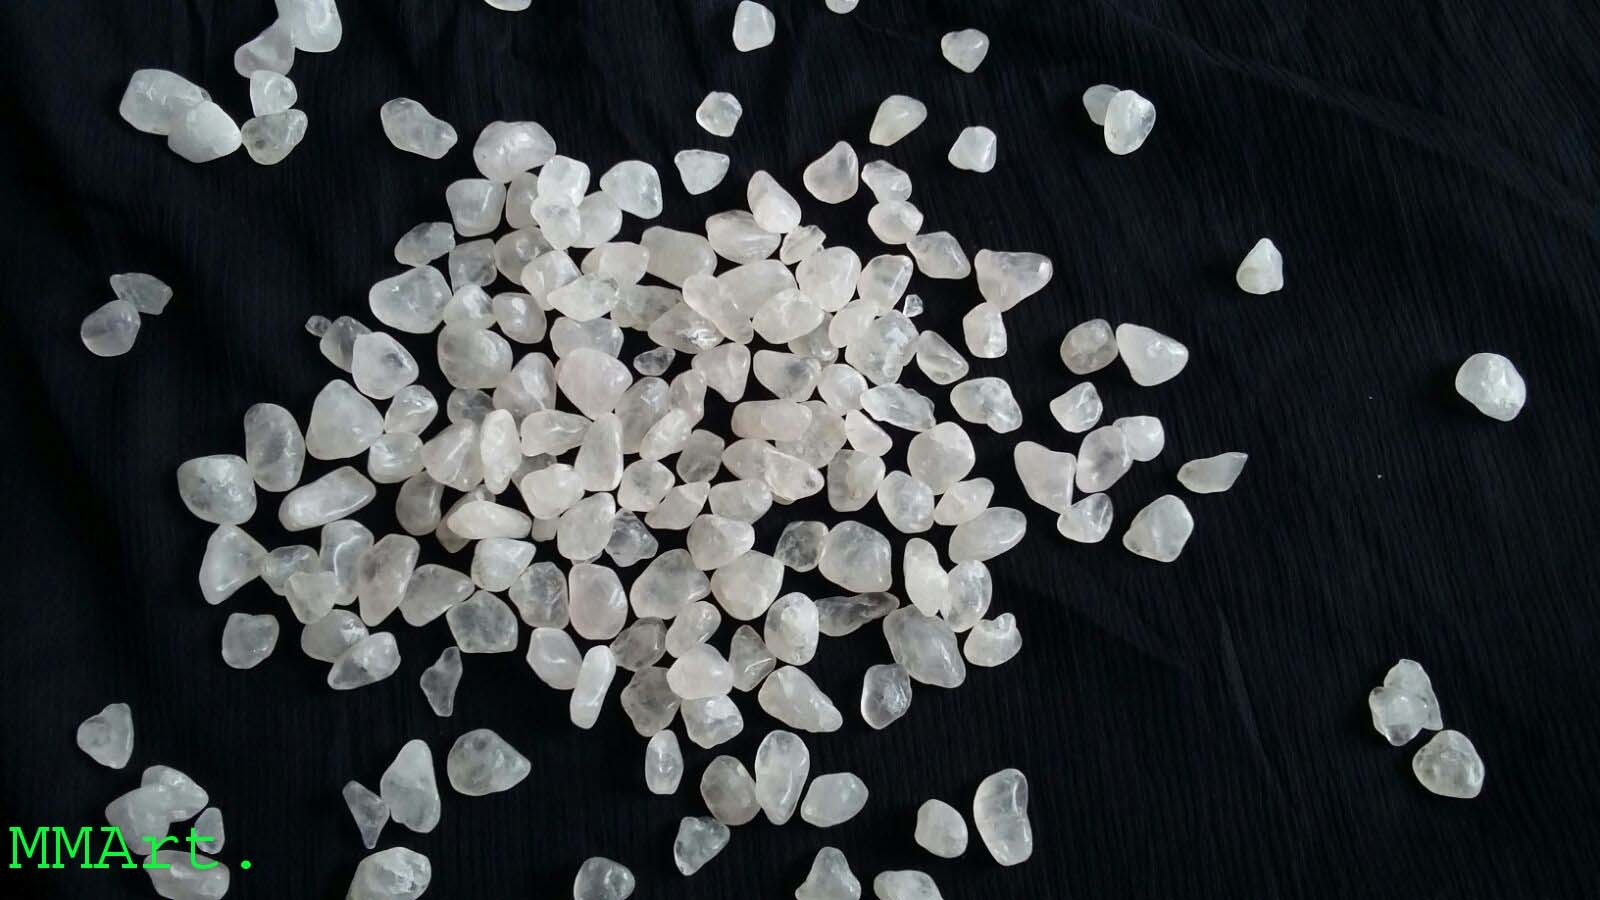 CRYSTAL QUARTZ POLISHED TUMBLED AND GLOSSY POLISHED STONE GRAVELS & CHIPS